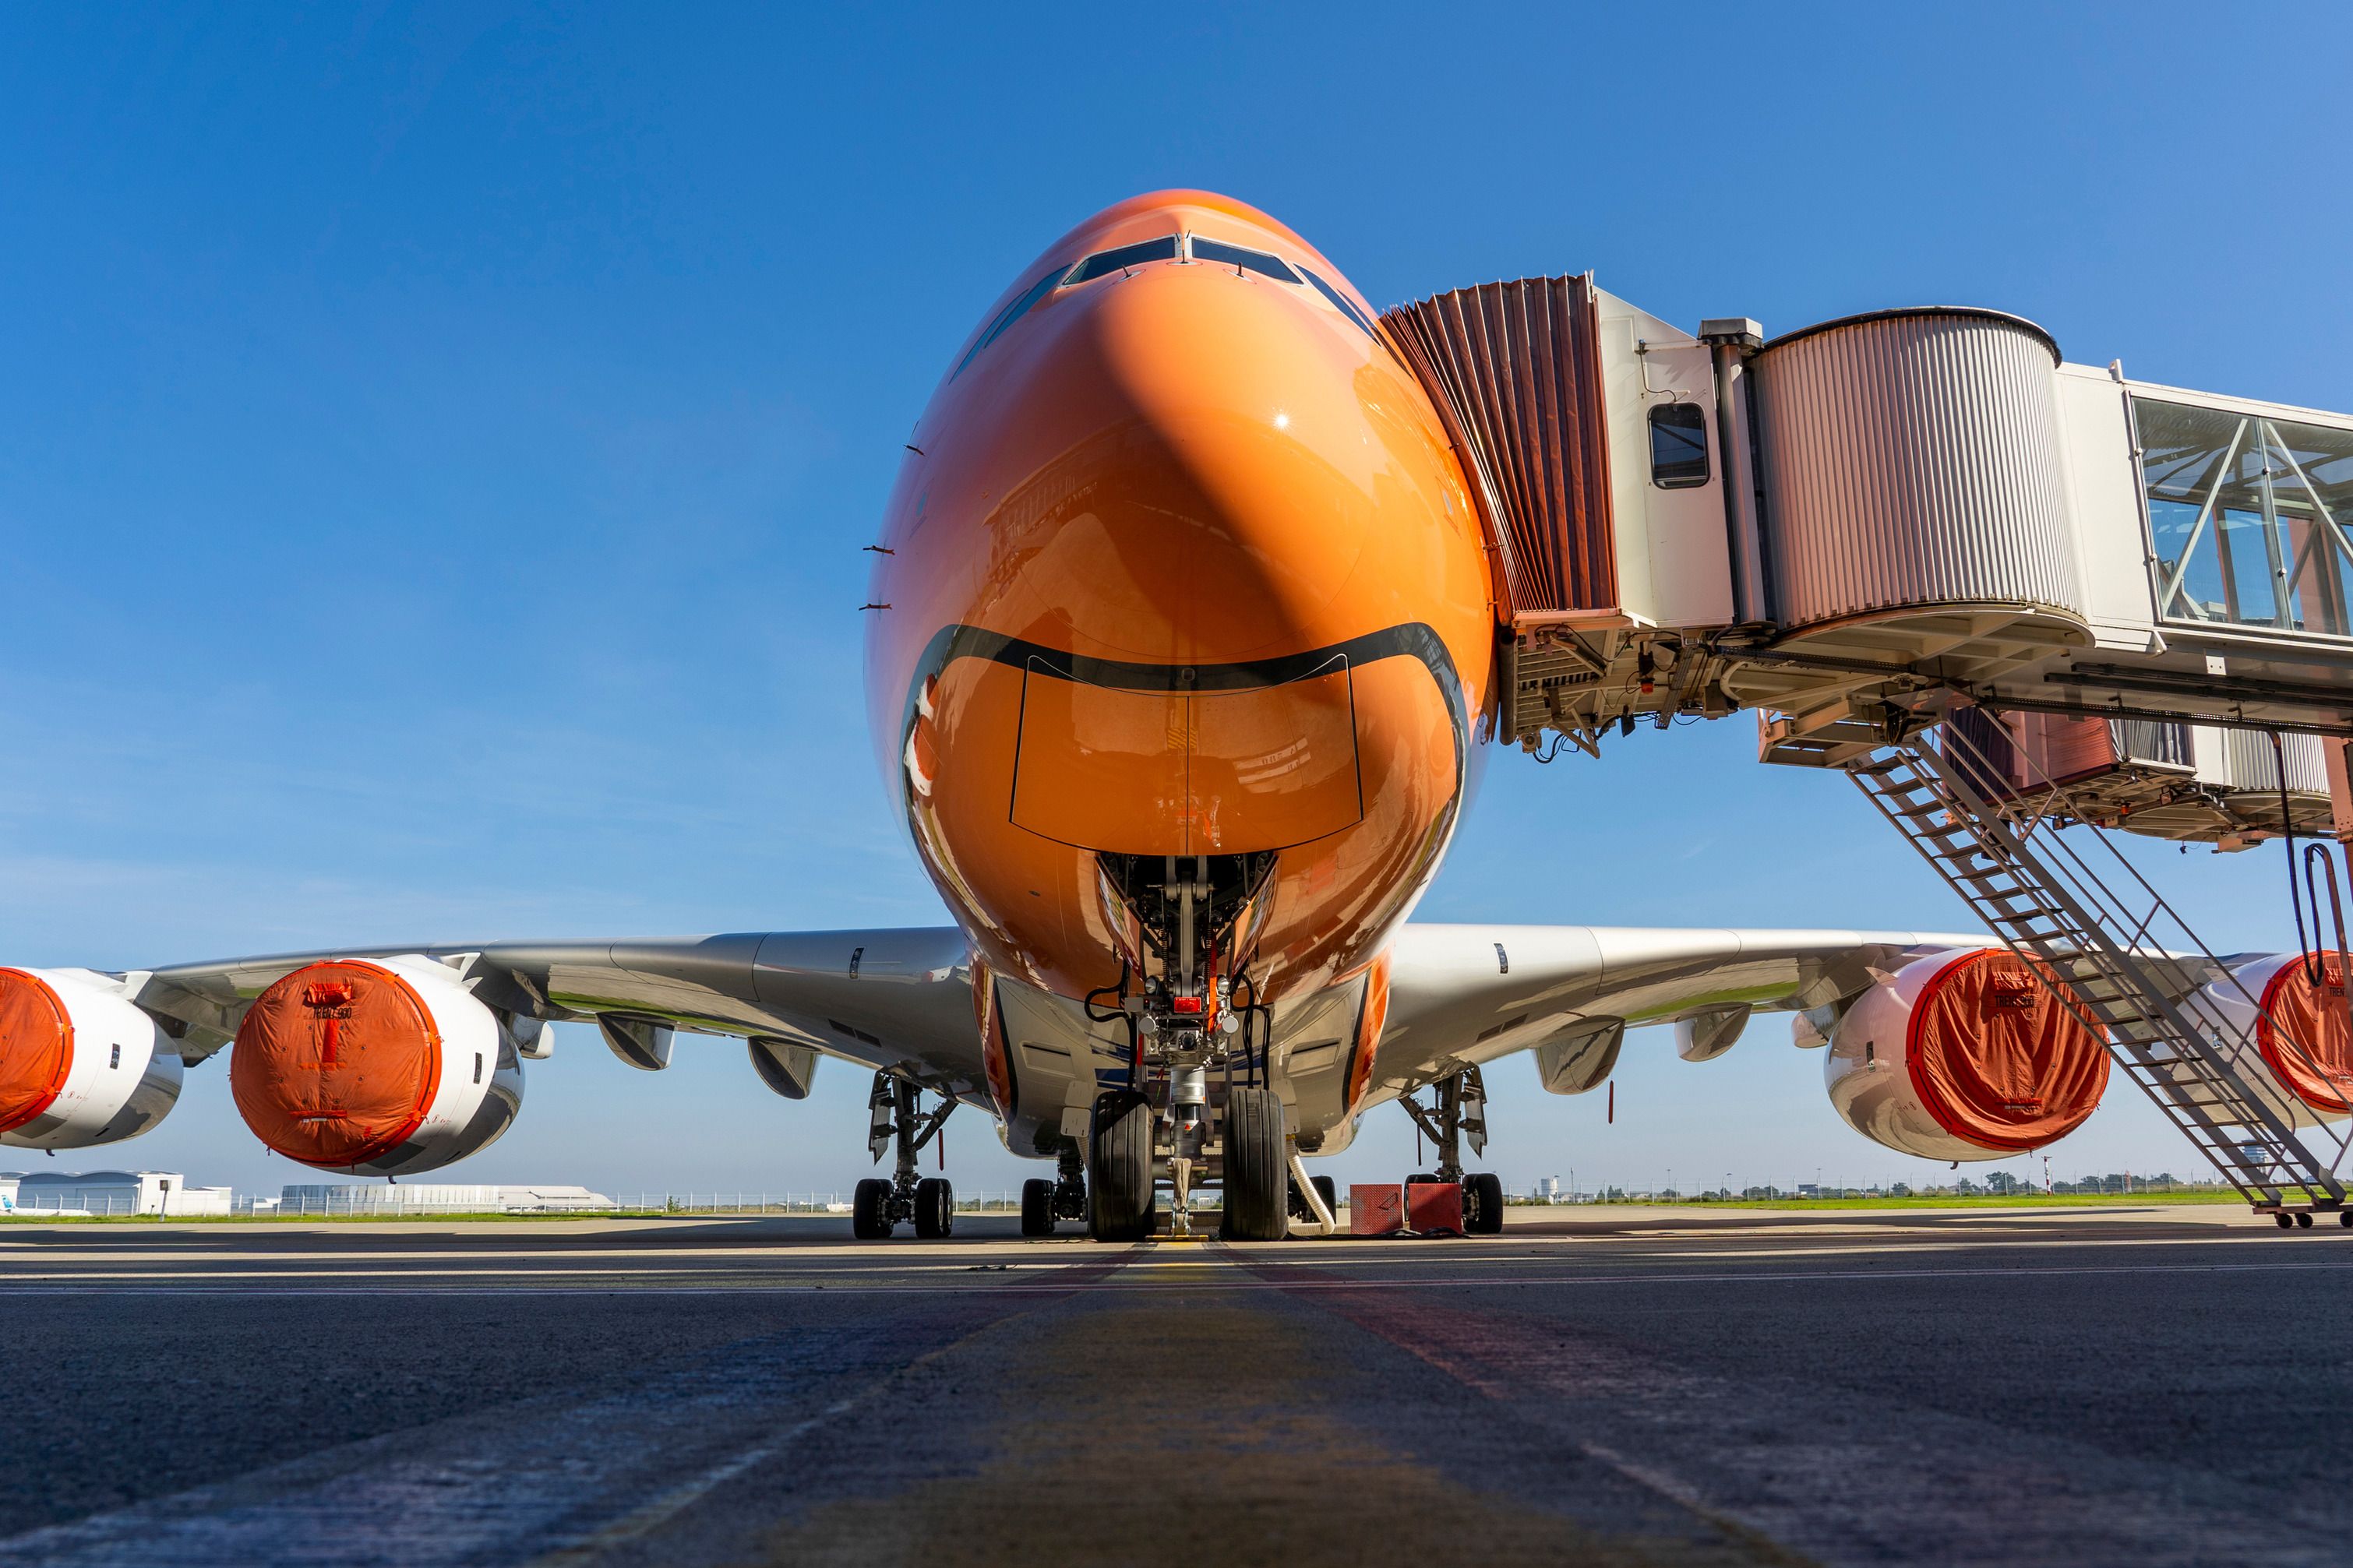 An orange All Nippon Airways Airbus A380 parked at an airport gate.